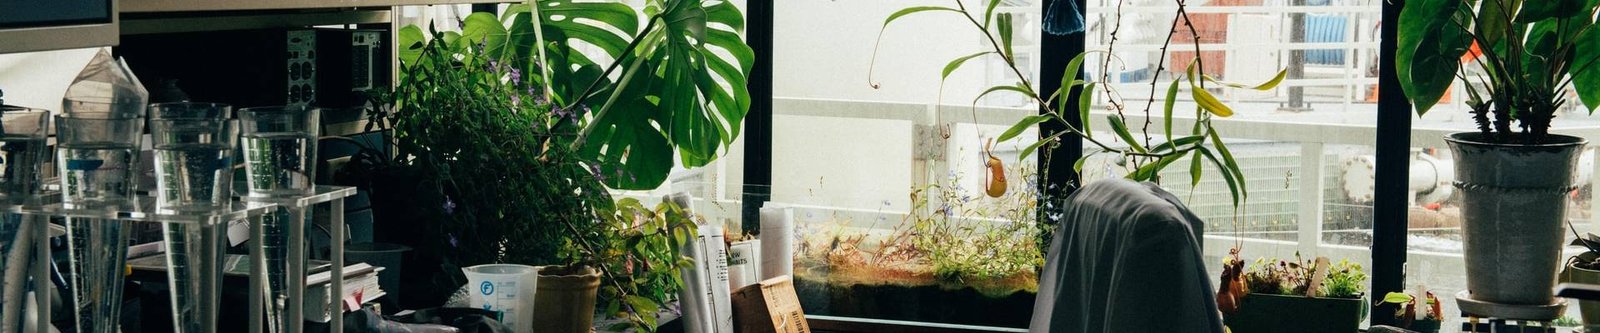 Plants in a lab space